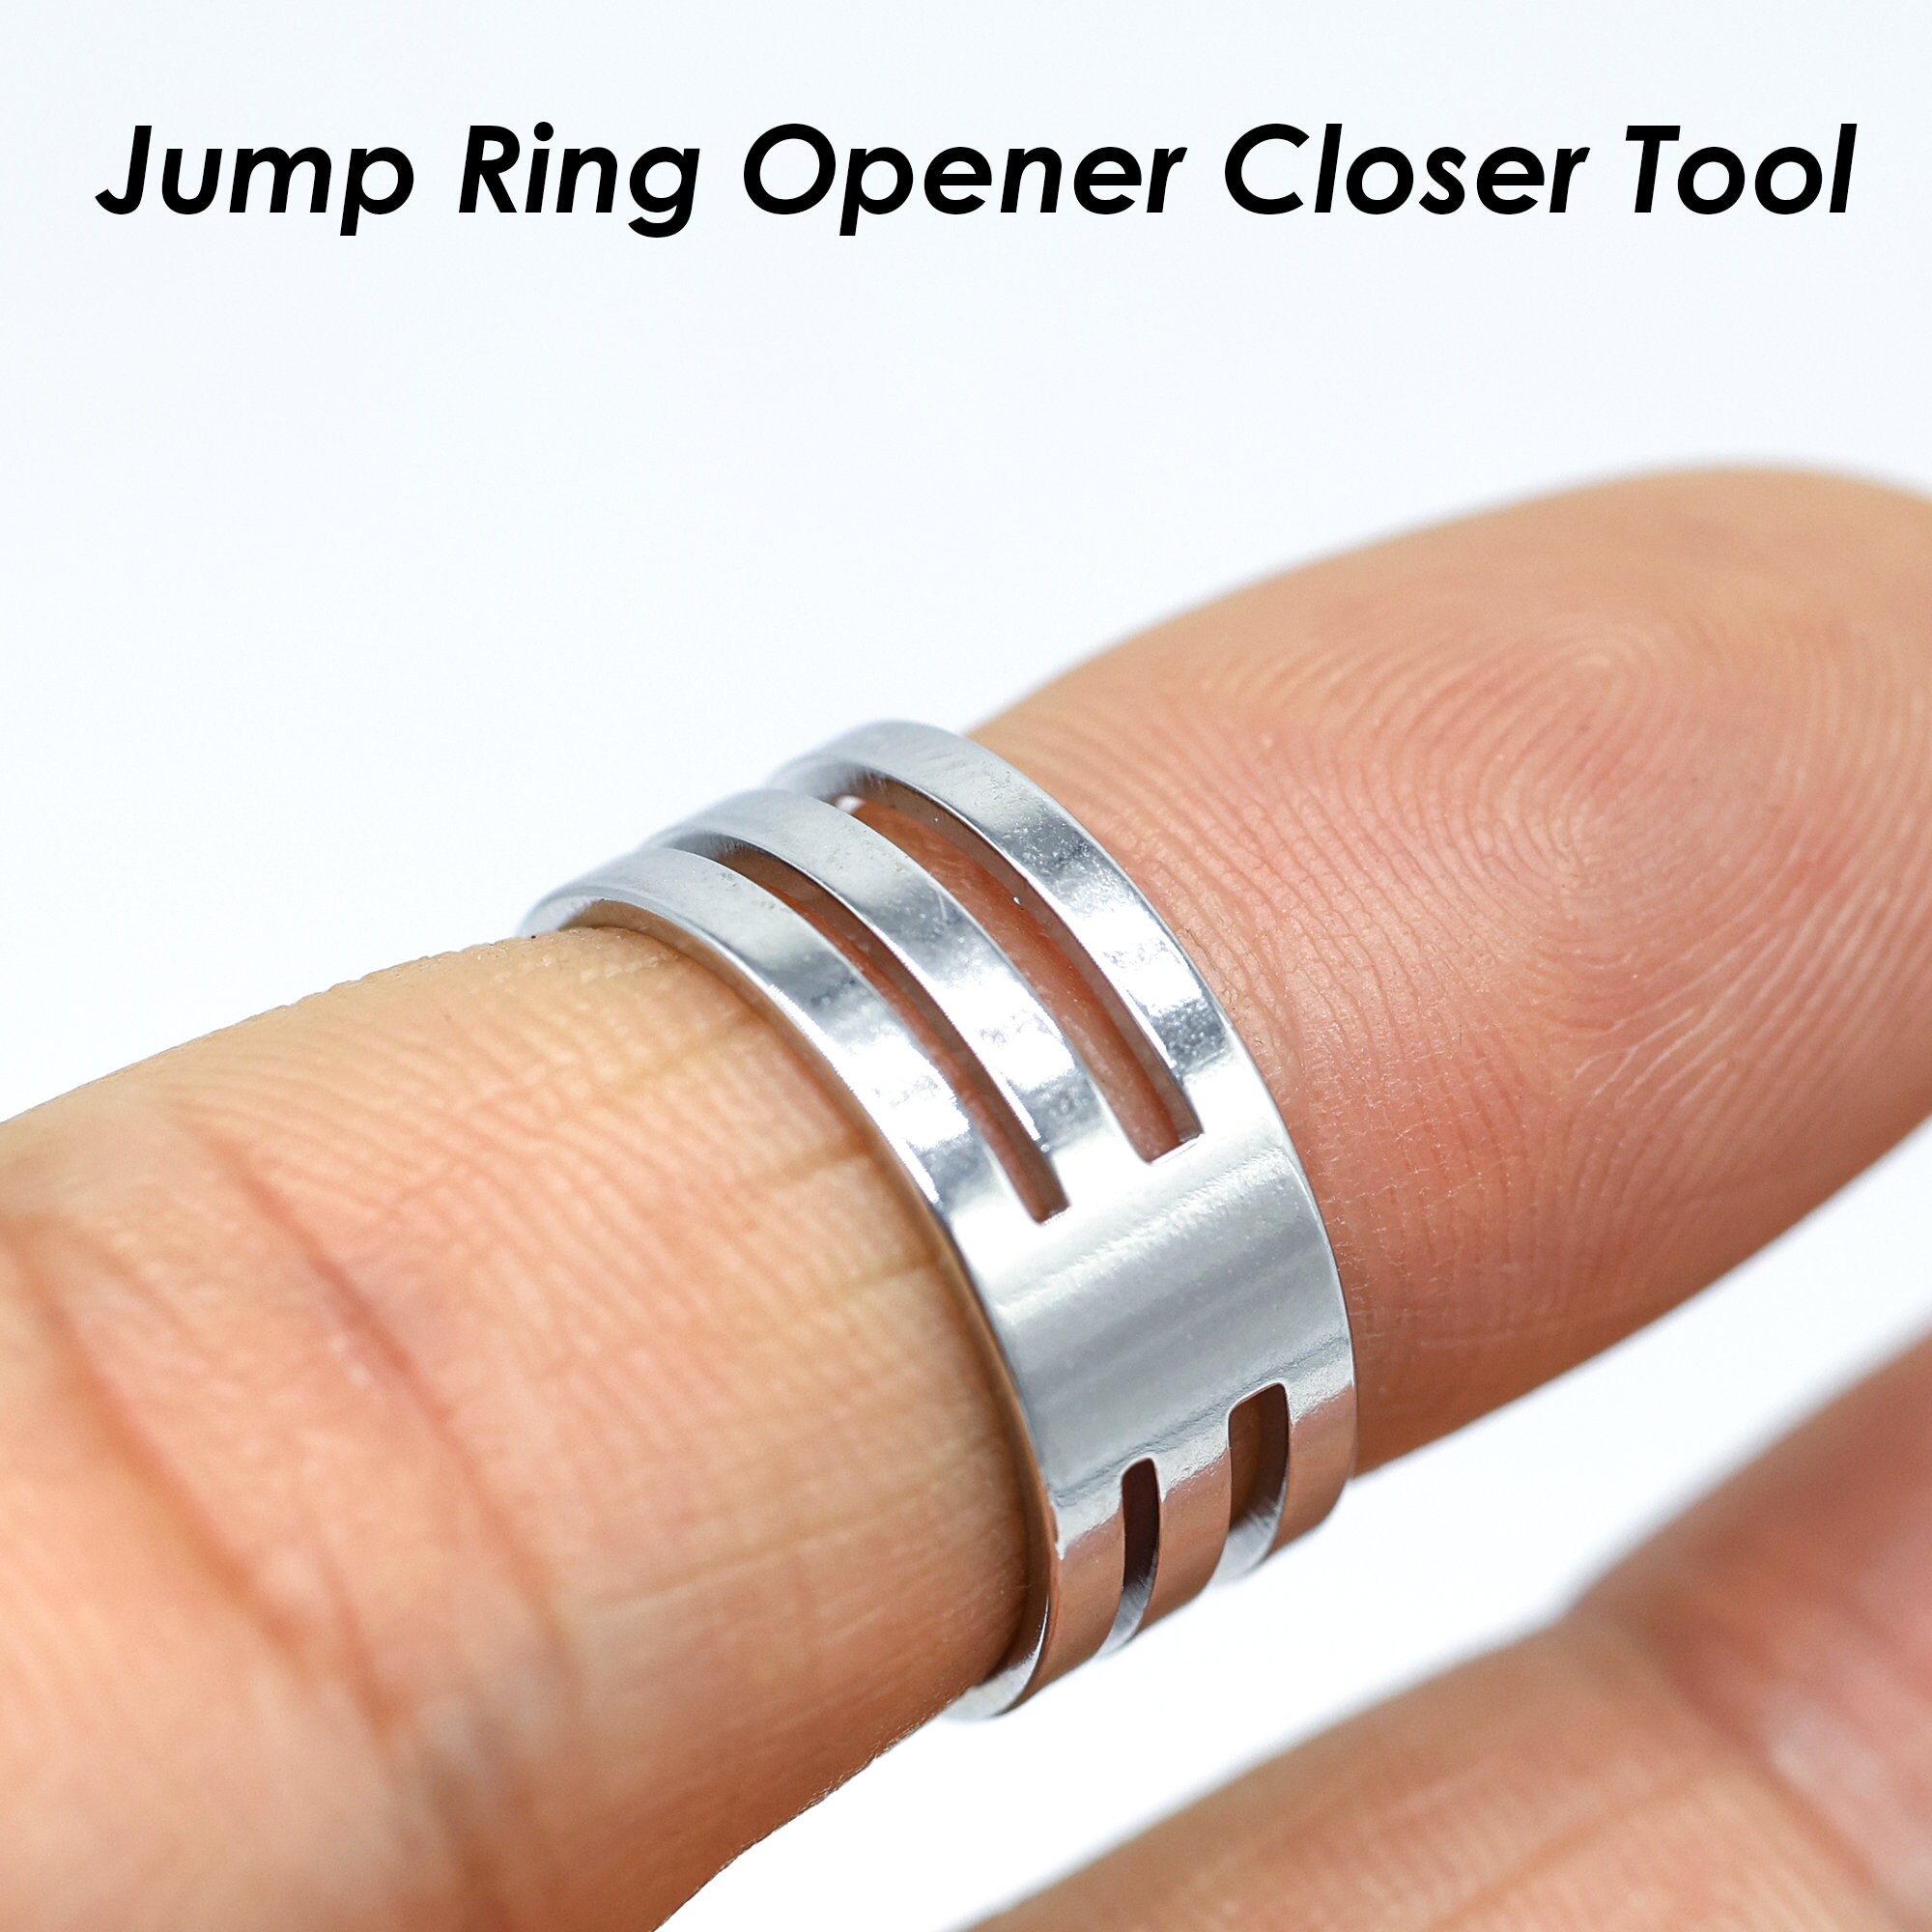 Jump ring opener closer tool, Stainless steel, Jewelry making supplies